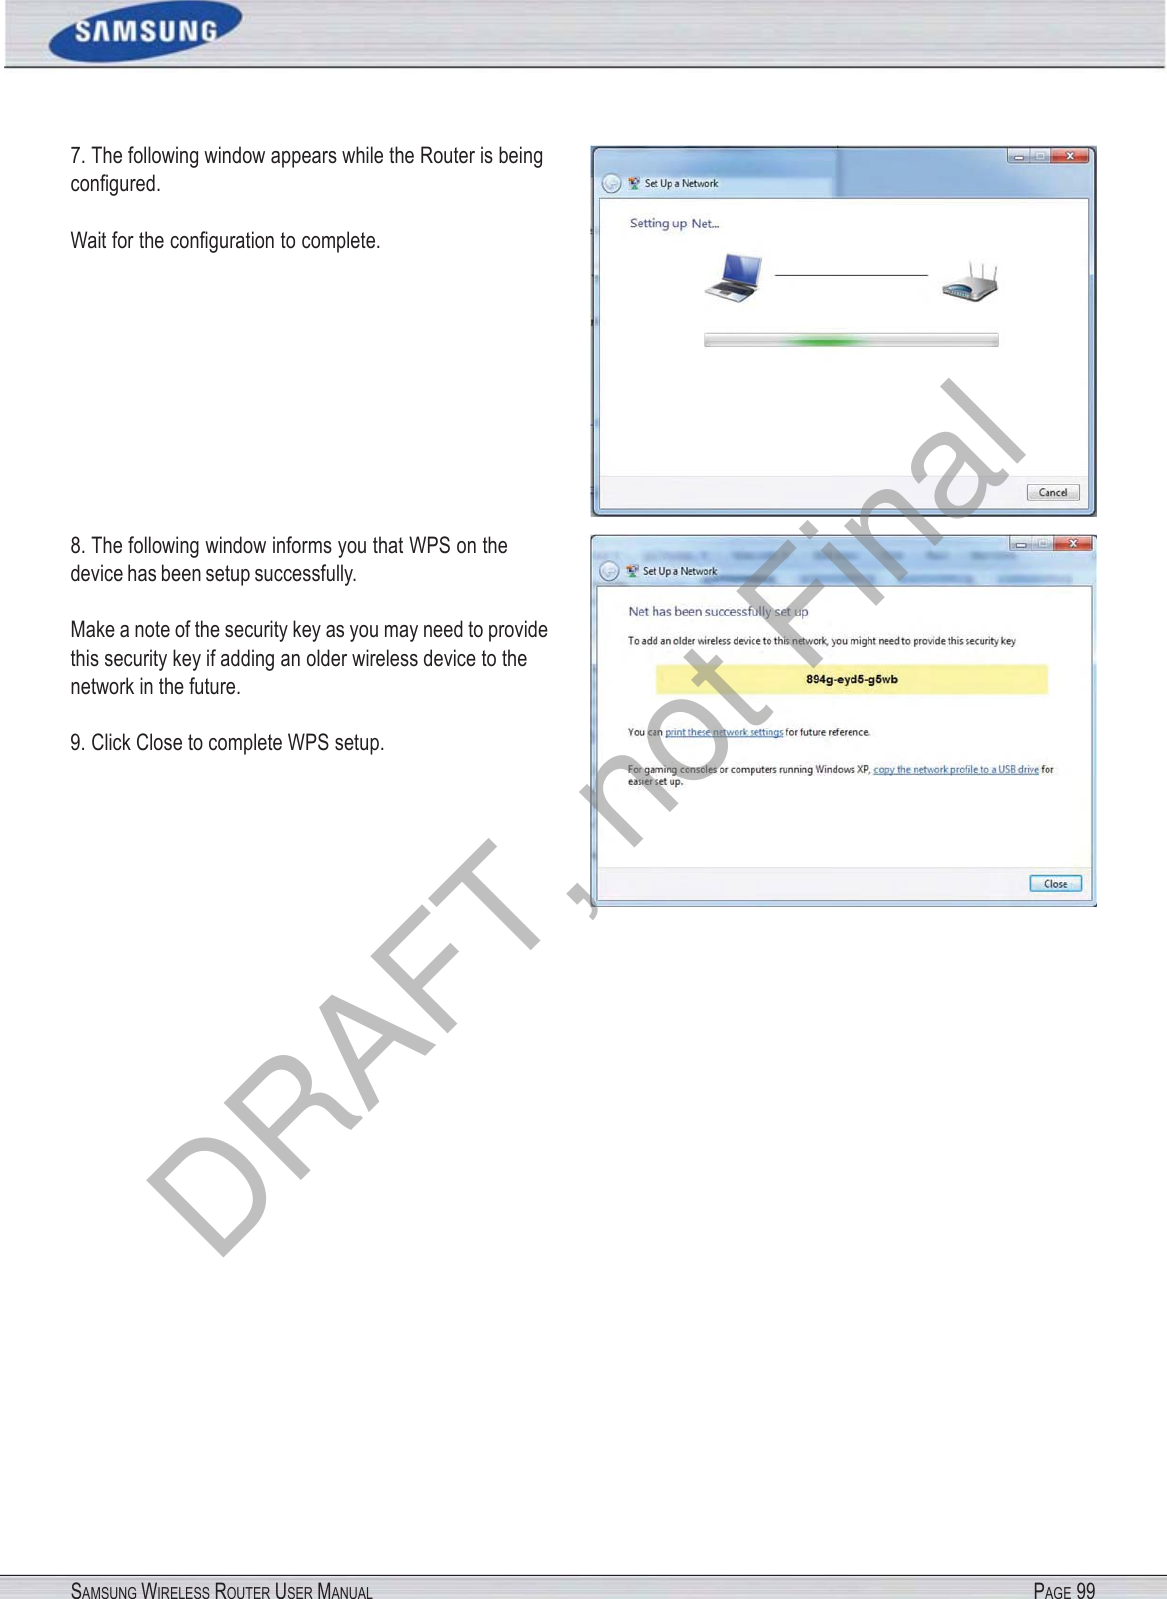 SAMSUNG WIRELESS ROUTER USER MANUAL PAGE 997. The following window appears while the Router is being conﬁgured. Wait for the conﬁguration to complete. 8. The following window informs you that WPS on the device has been setup successfully. Make a note of the security key as you may need to provide this security key if adding an older wireless device to the network in the future. 9. Click Close to complete WPS setup. DRAFT, not Final